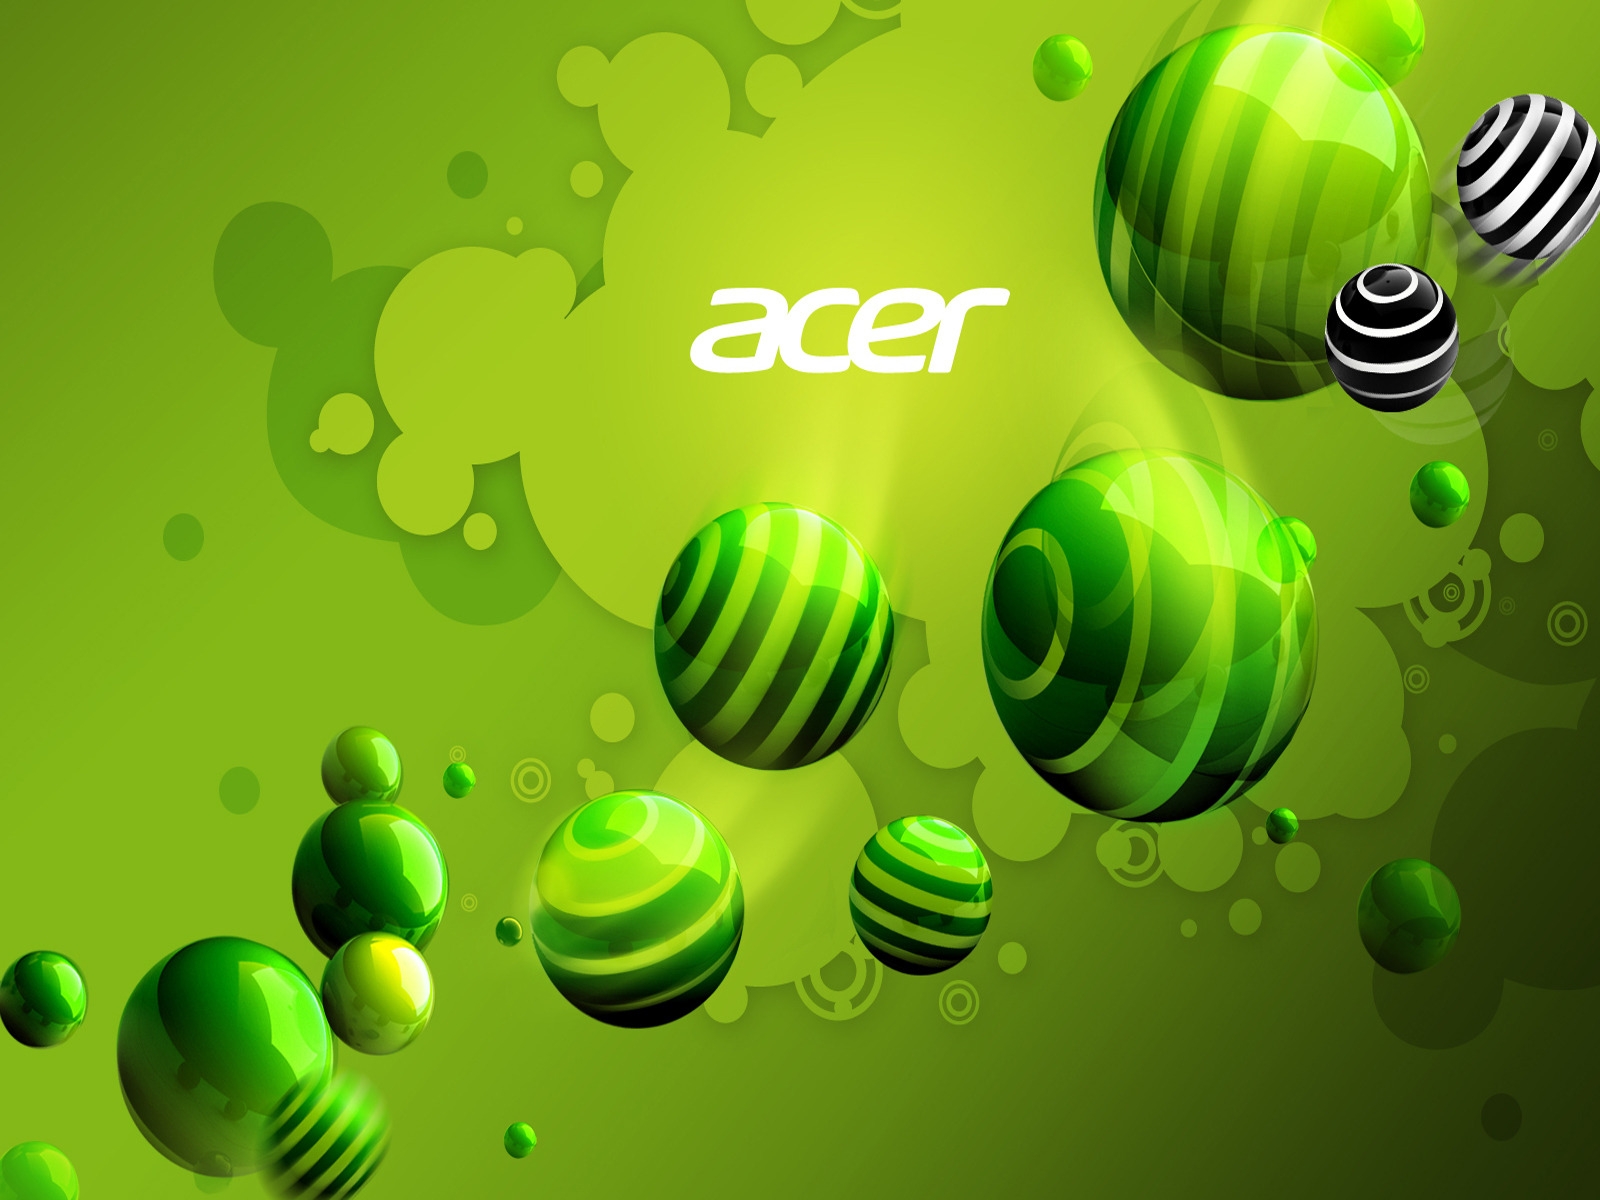 Acer Green World for 1600 x 1200 resolution